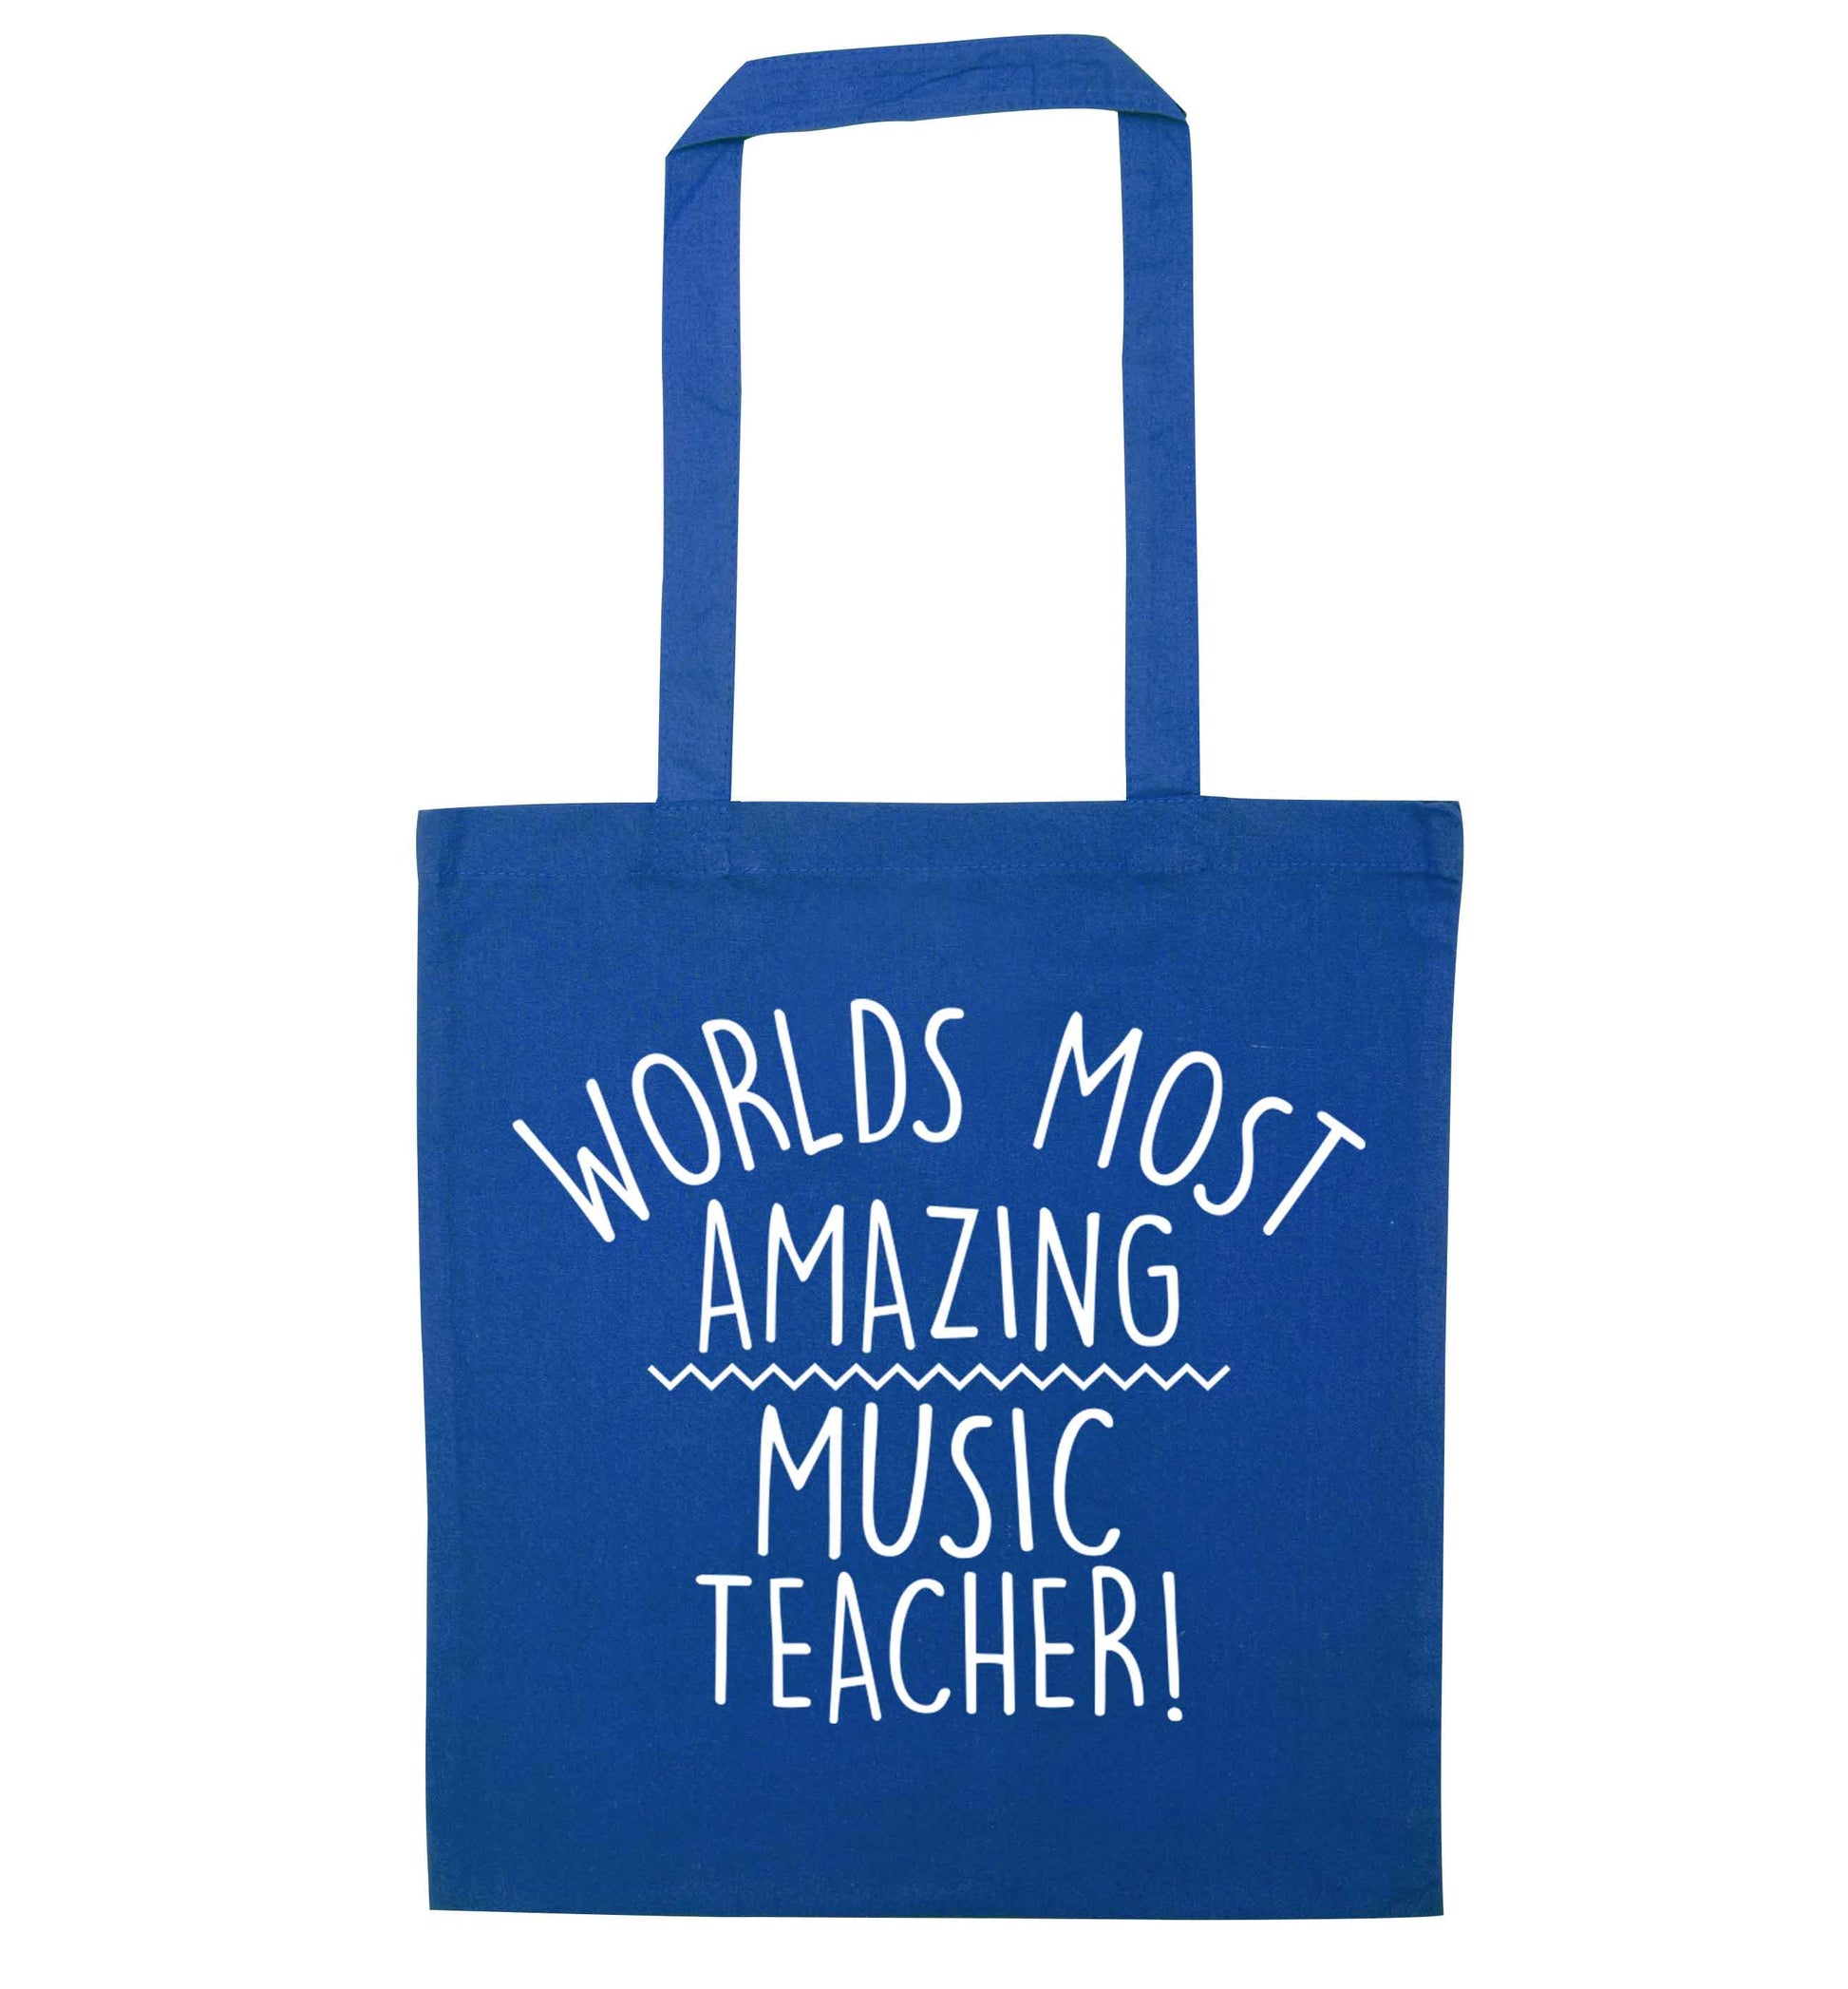 Worlds most amazing music teacher blue tote bag